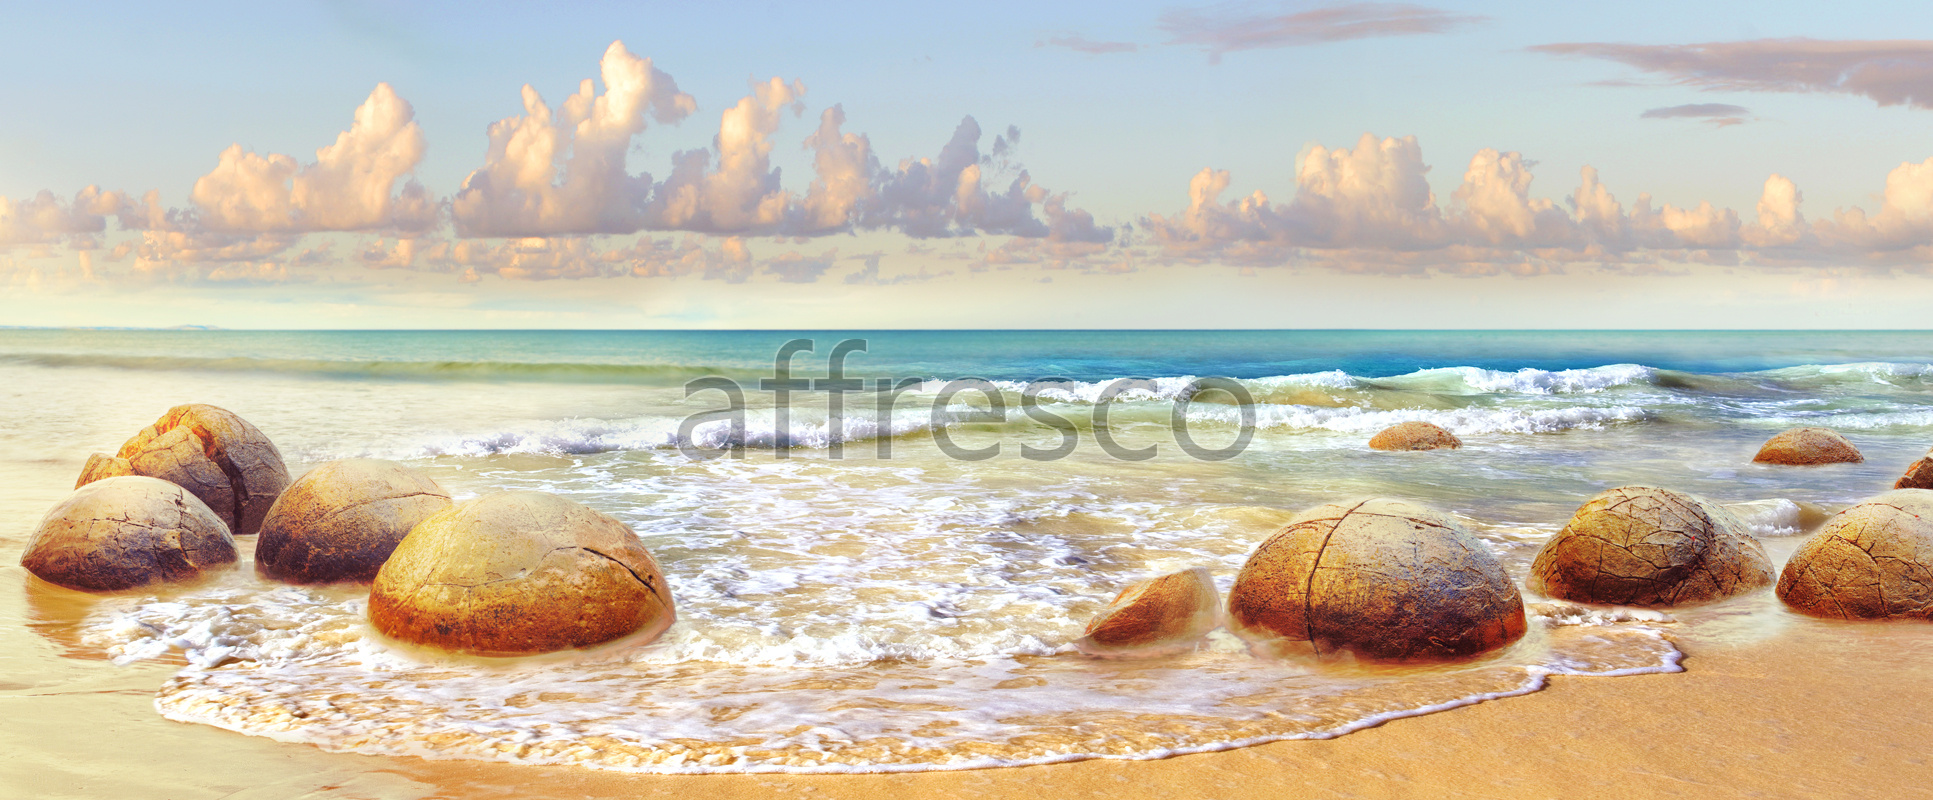 ID11198 | Pictures of Nature  | Wave stones | Affresco Factory